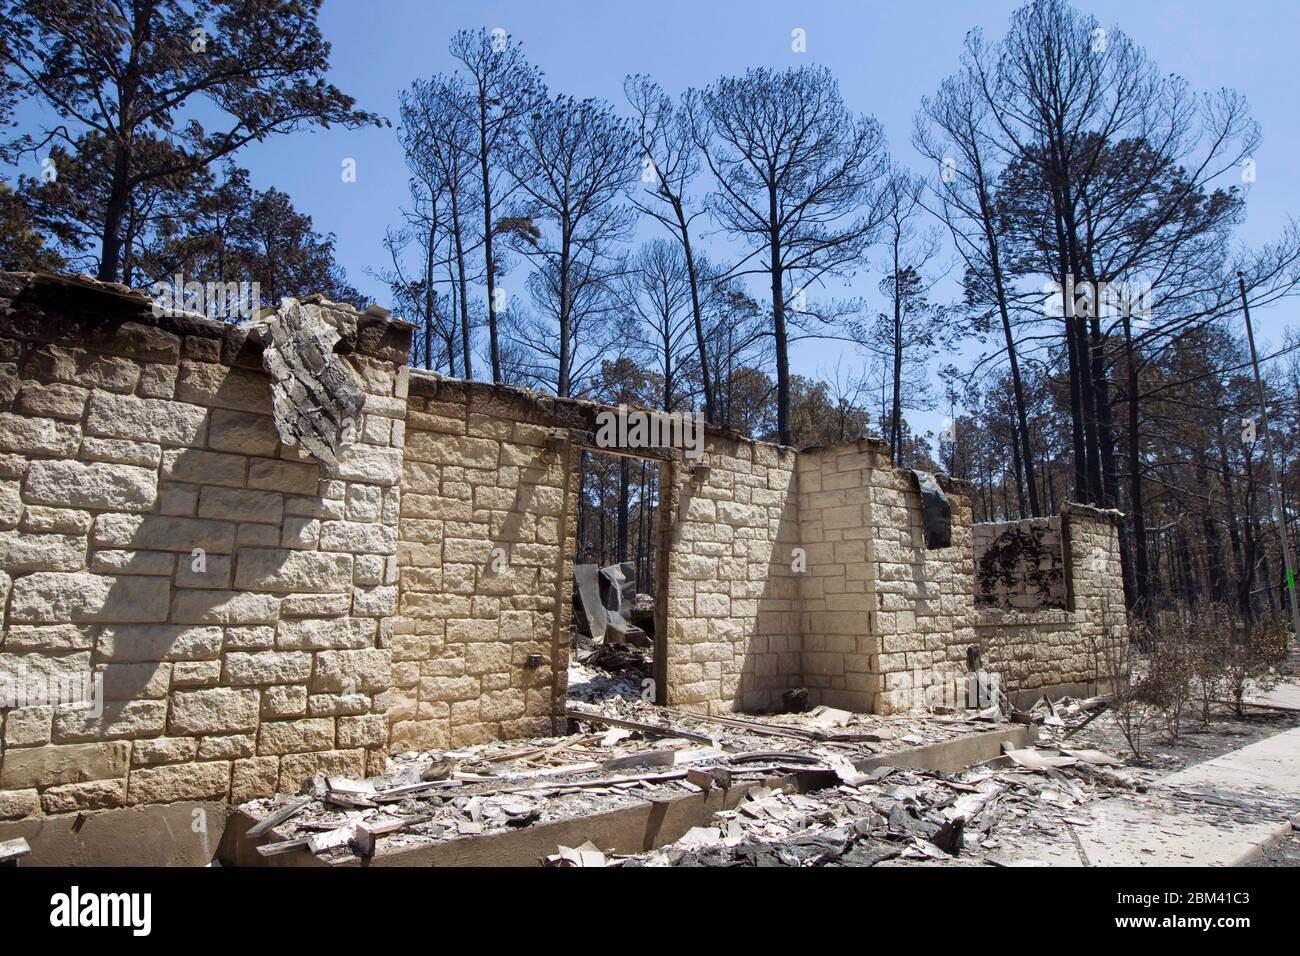 Bastrop County Texas USA, September 9, 2011: The aftermath of wildfire through the piney woods in Bastrop County 30 miles east of Austin is shown in this destroyed homestead. The fires destroyed more than 1,400 houses and scorched more than 38,000 acres while it was out of control for five days. ©Bob Daemmrich Stock Photo